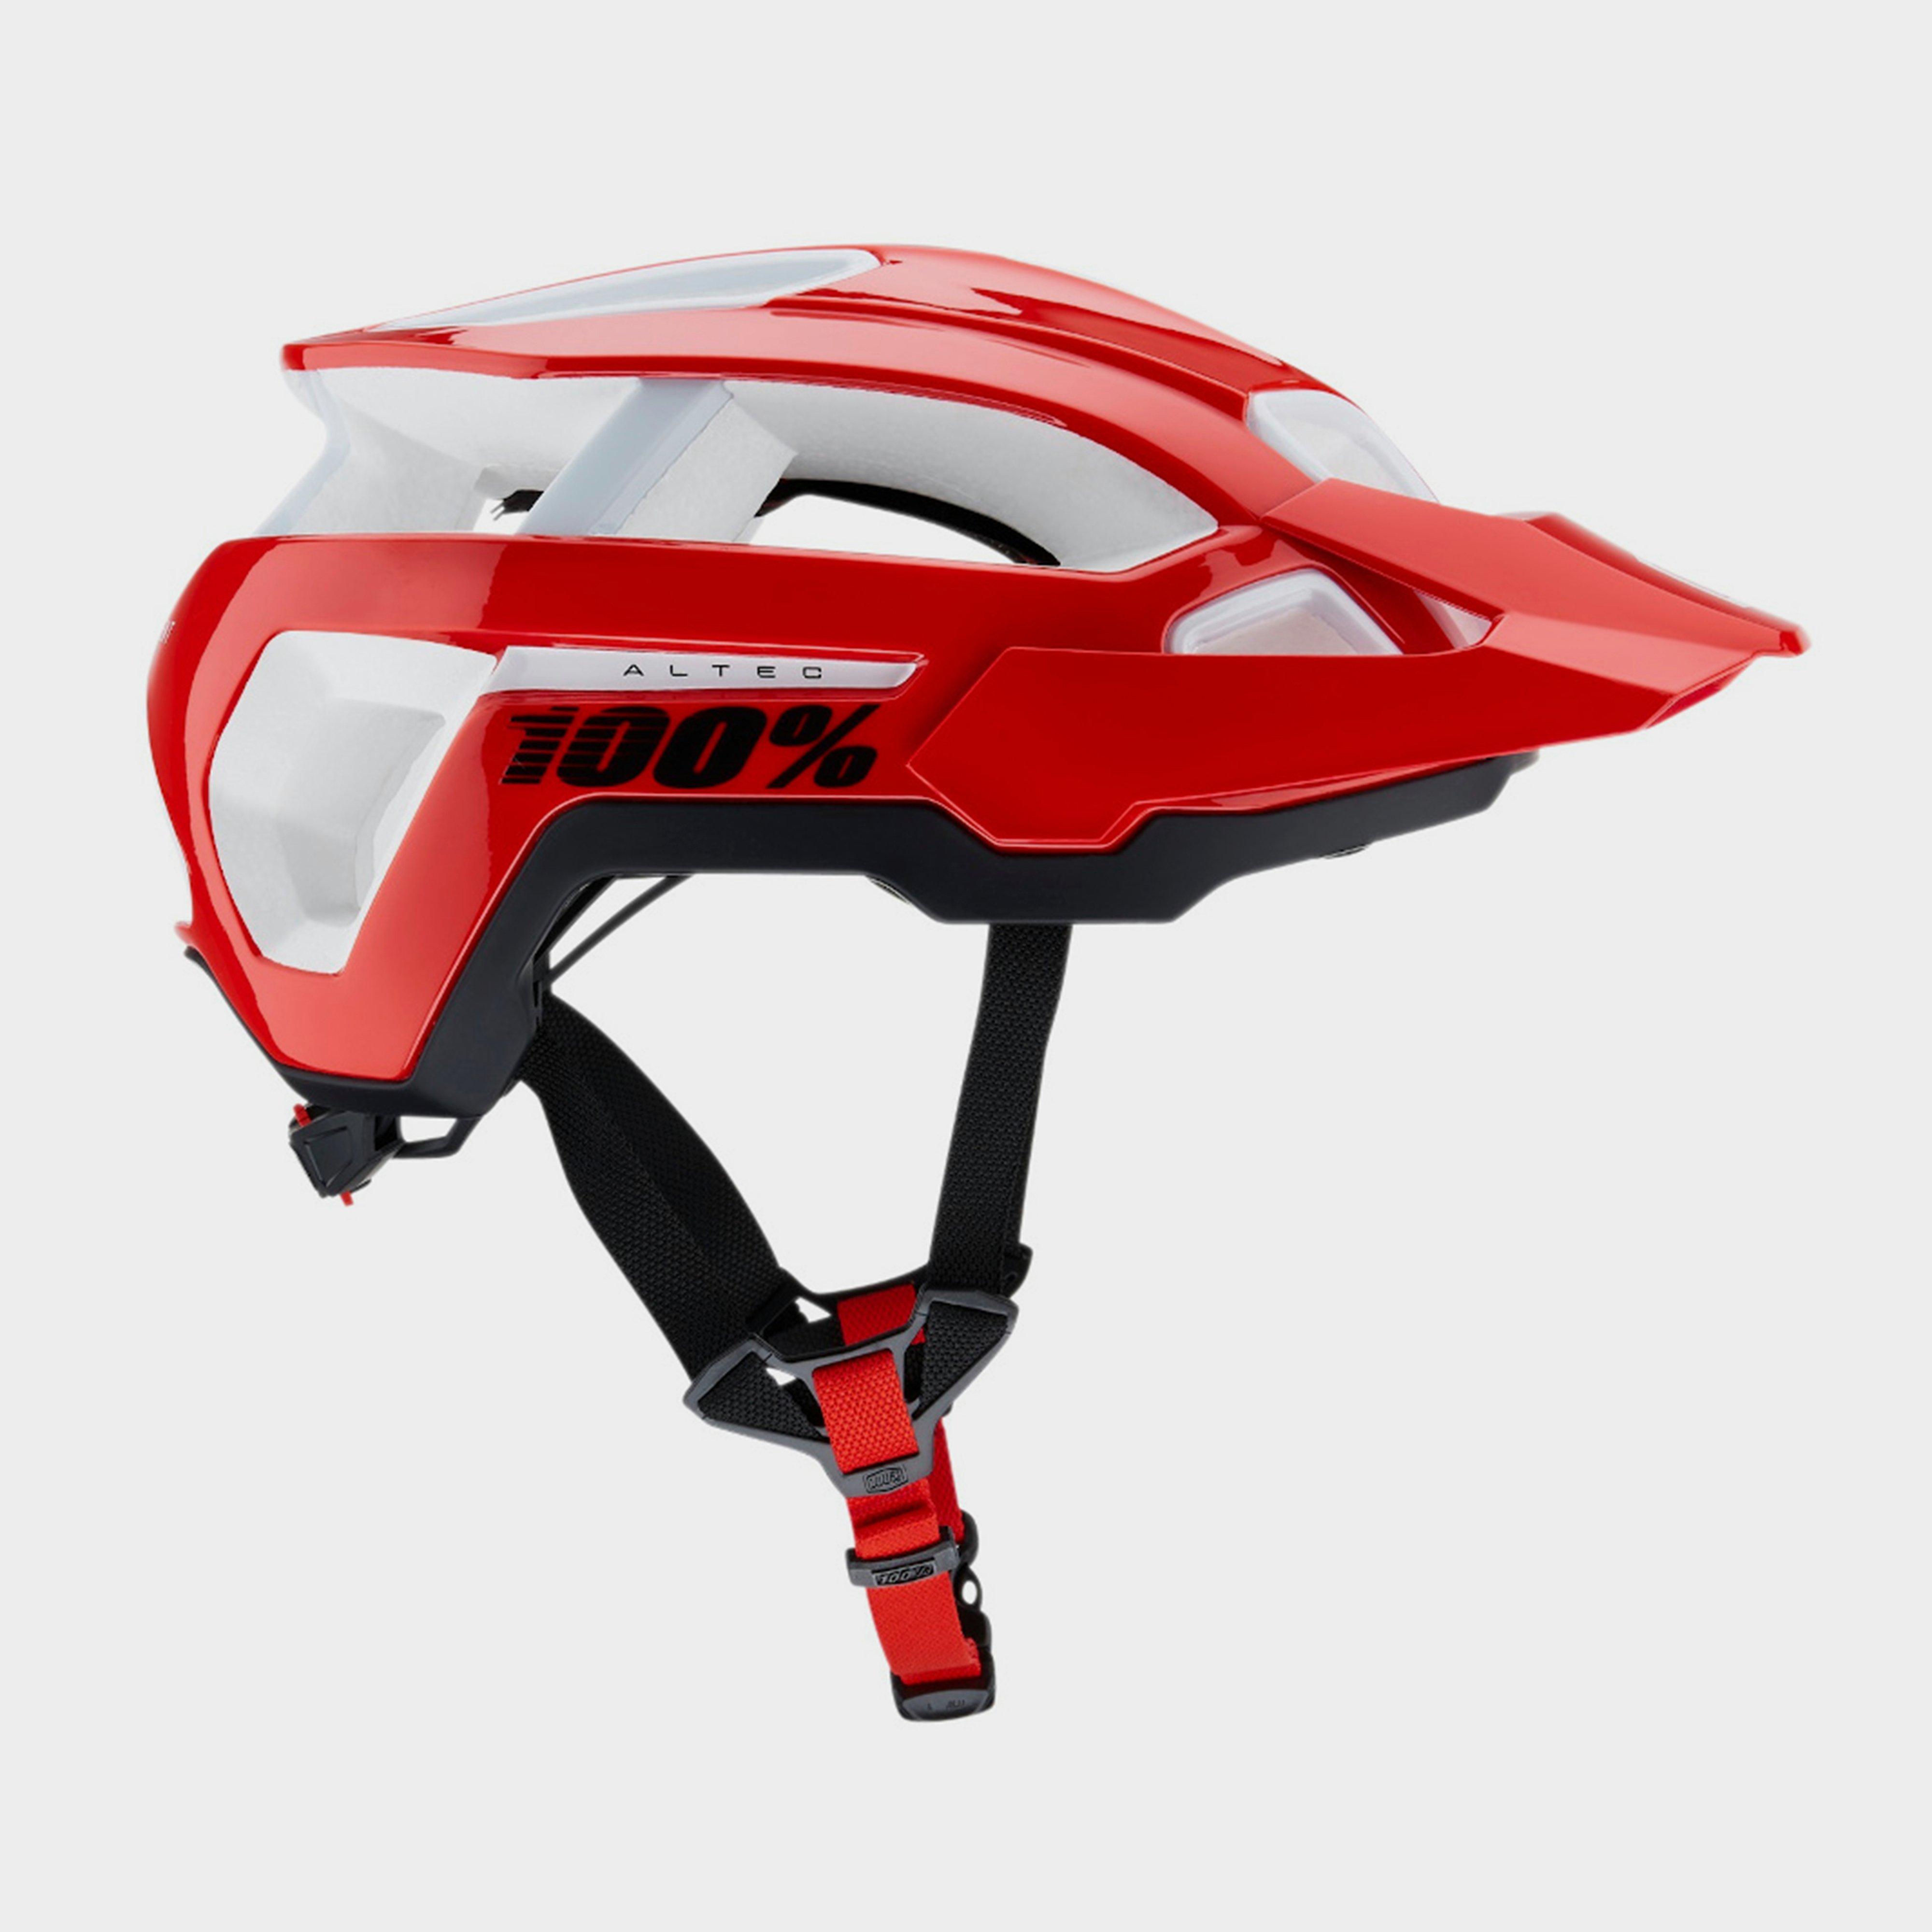 100% Altec Helmet - Red/red  Red/red